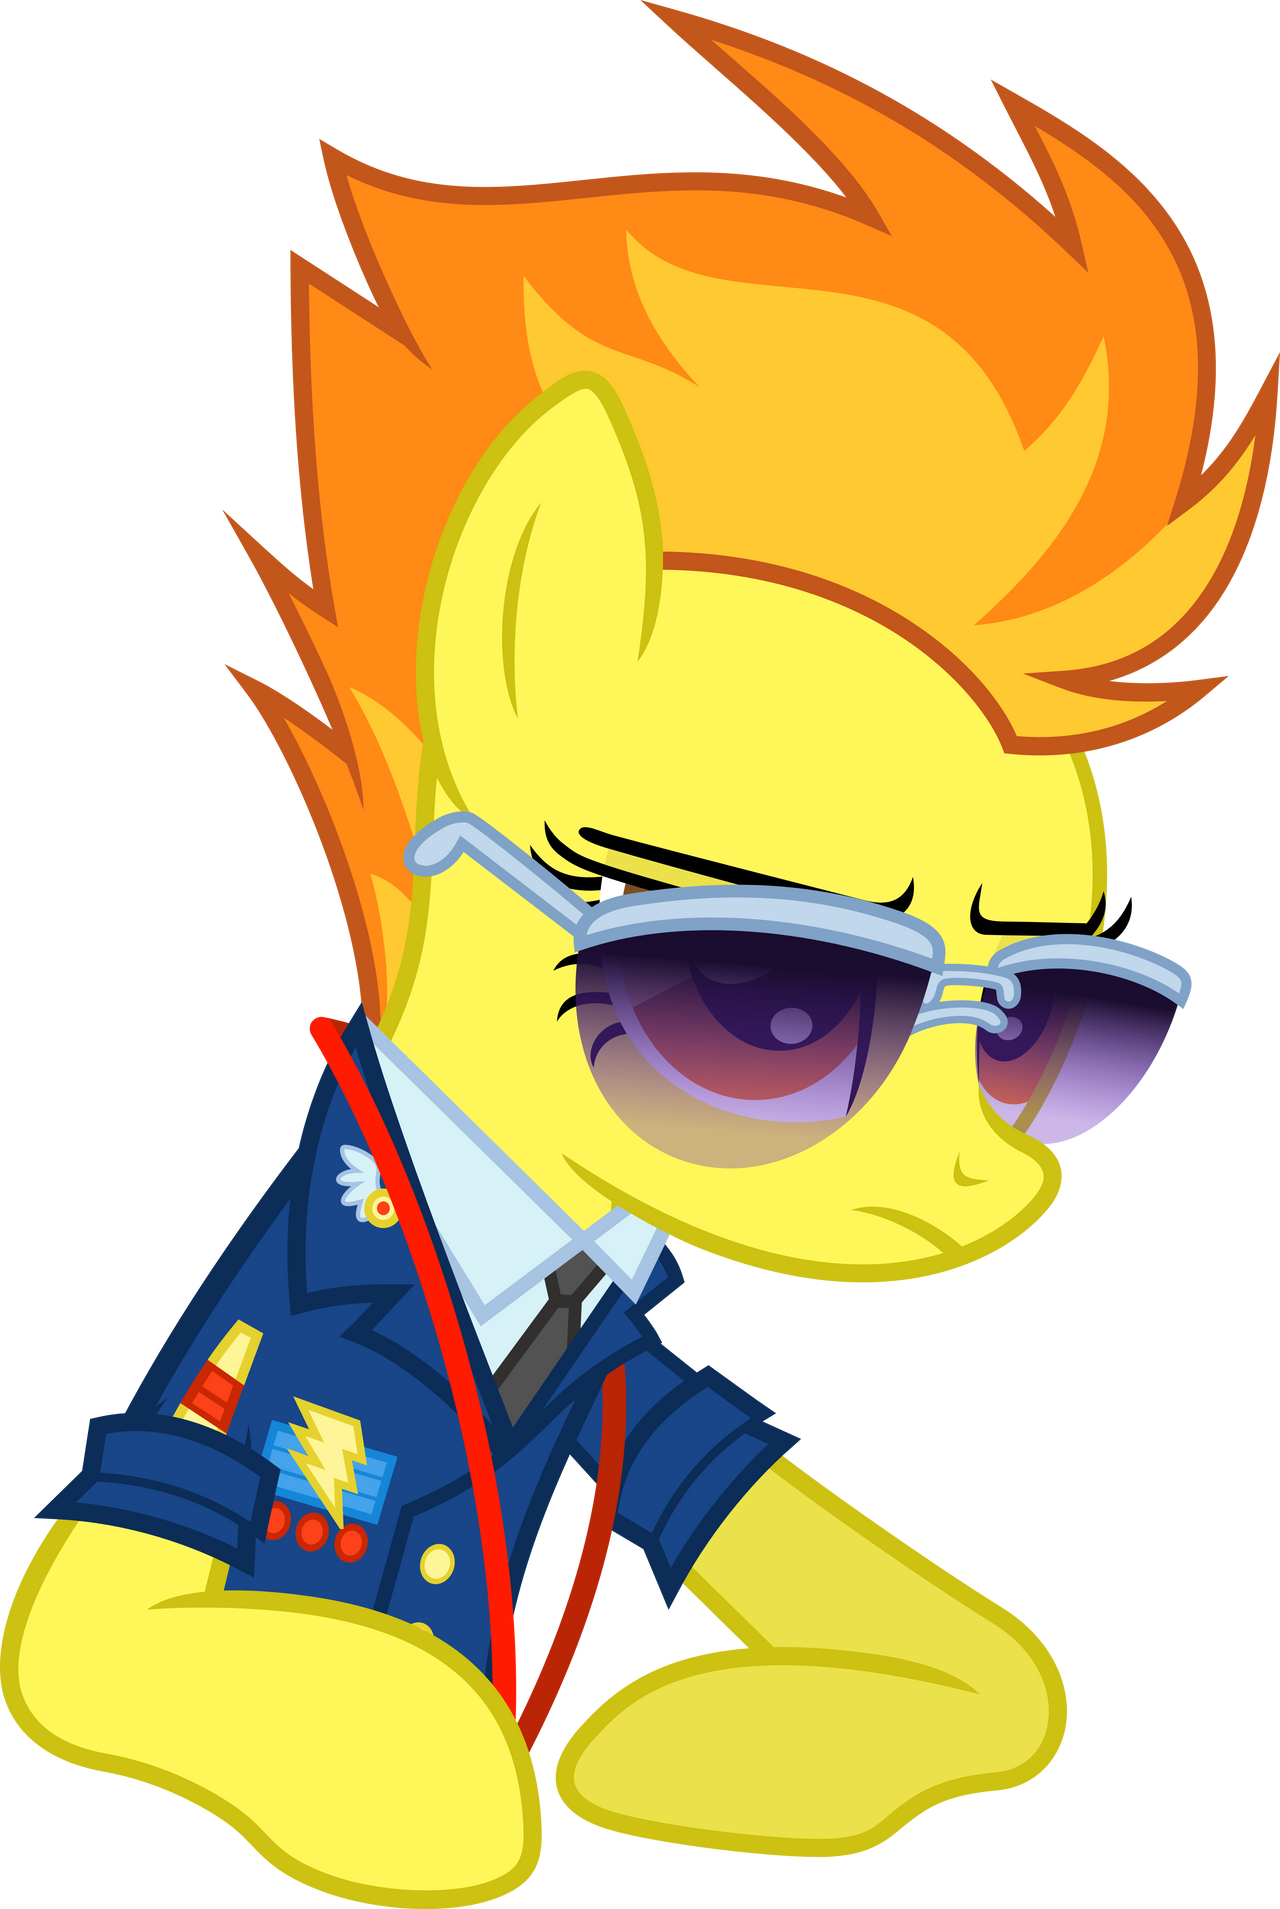 spitfire___are_you__kidding_me_by_d4svad